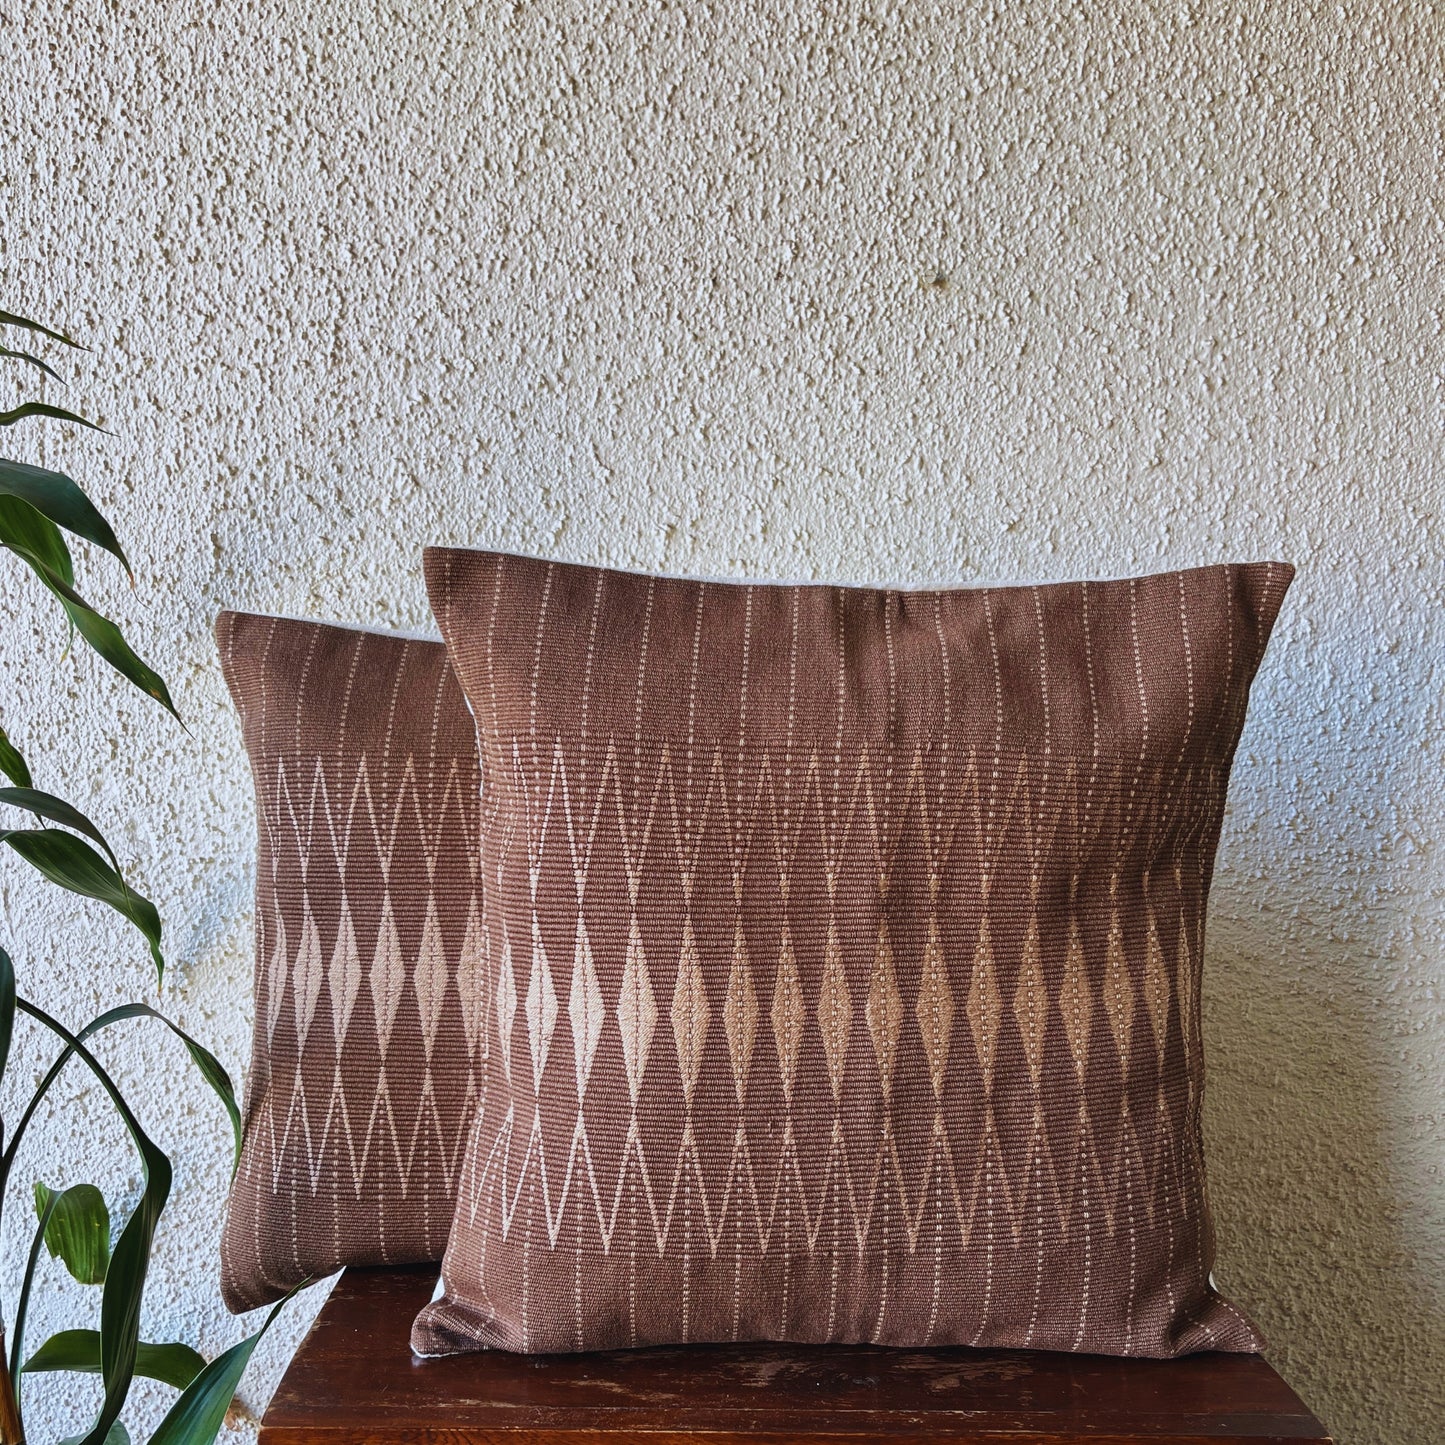 Chizami Weaves - Loin Loom Handwoven Cushion Cover Set in Brown (Set of 2)